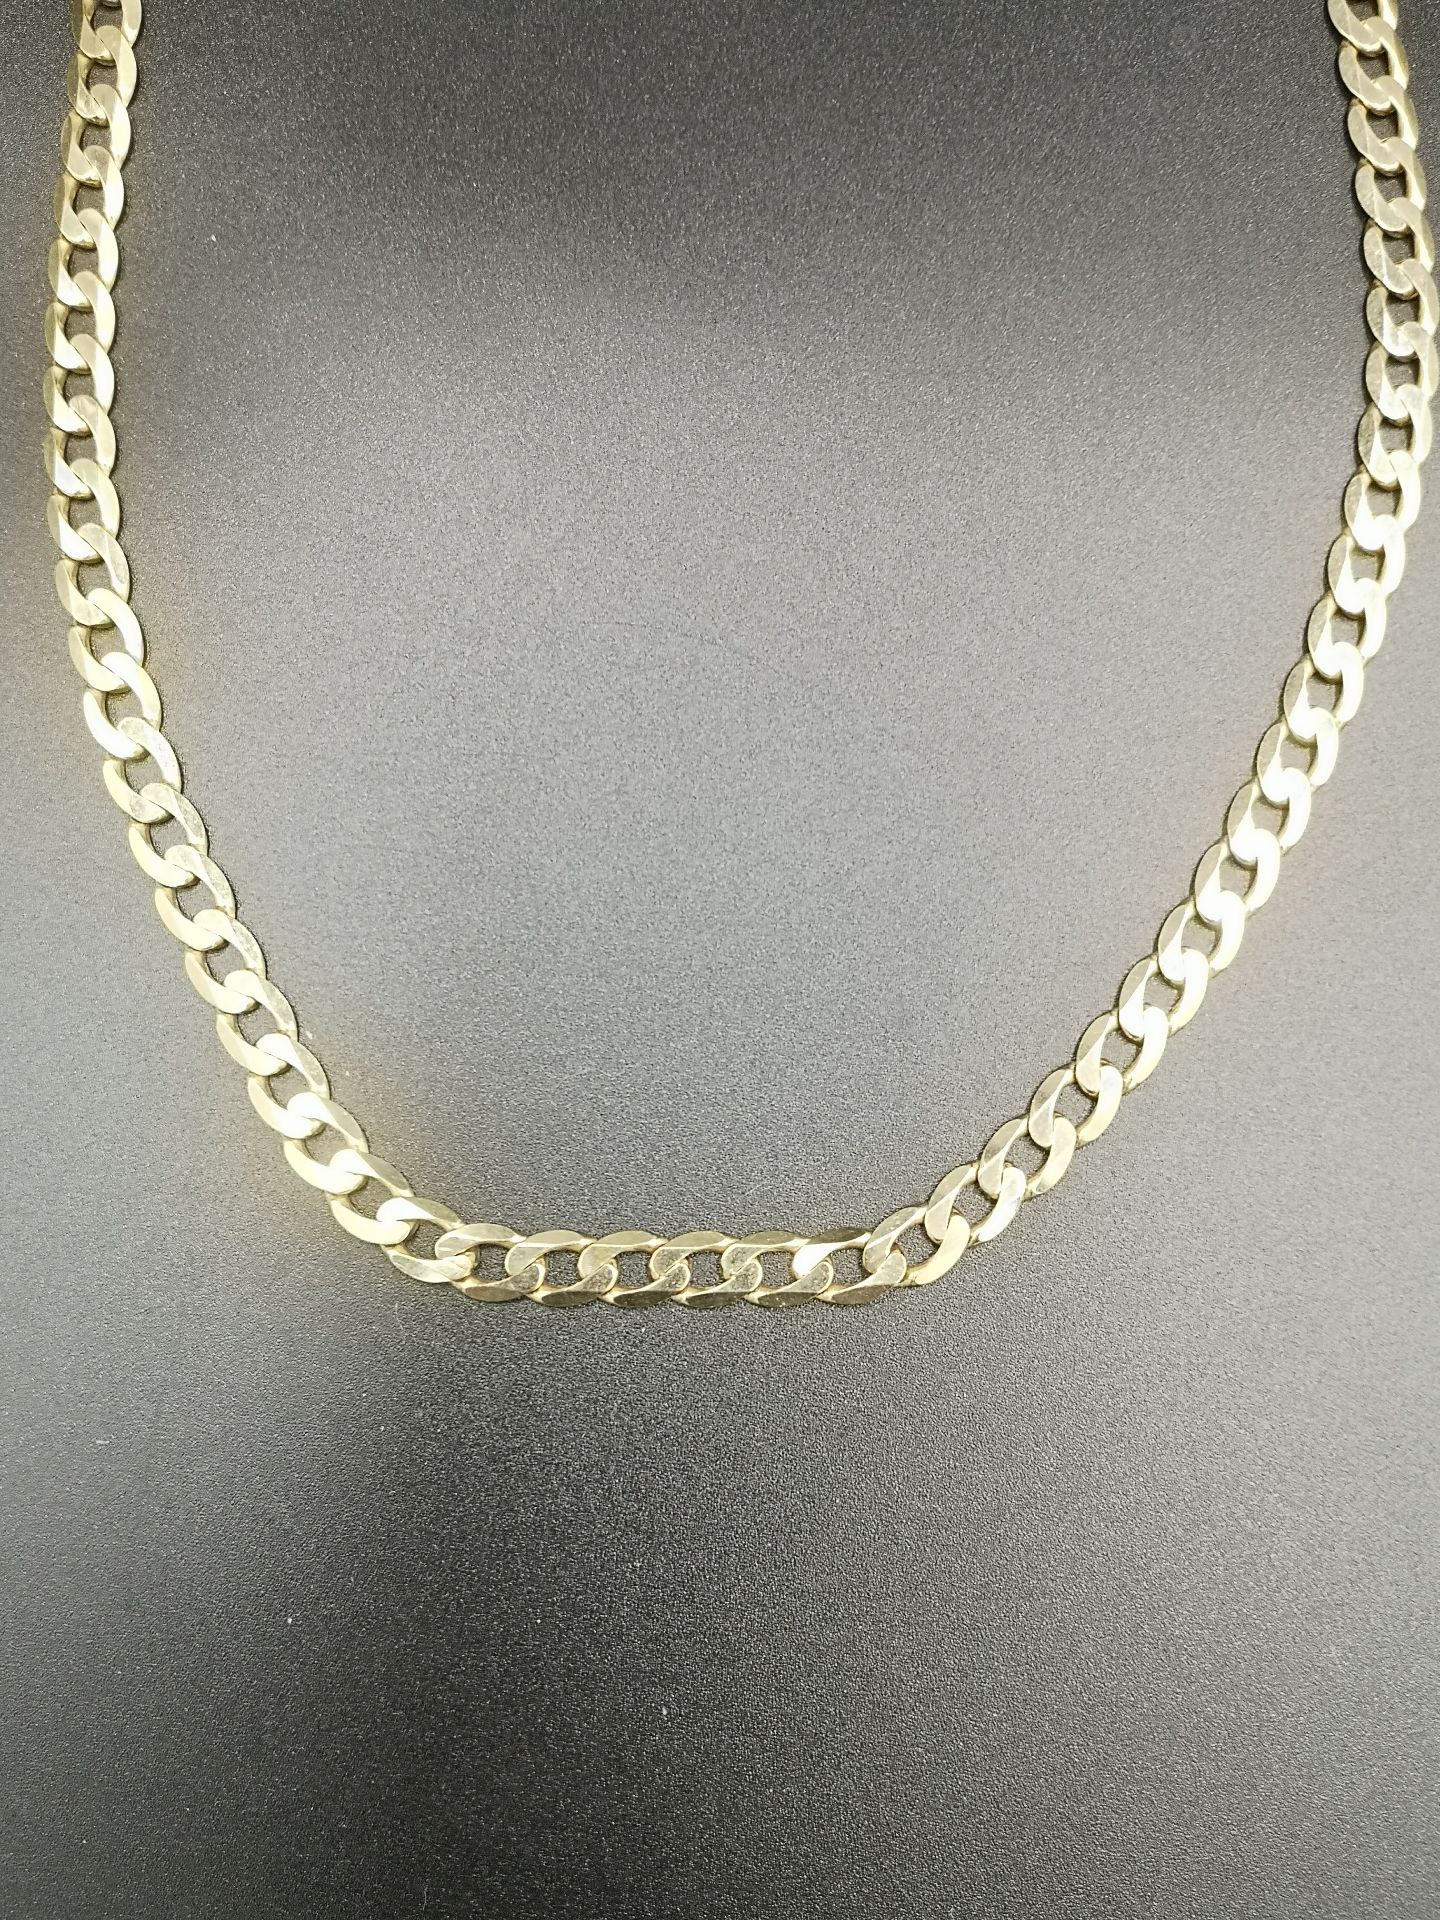 9ct gold curb link chain - Image 4 of 7